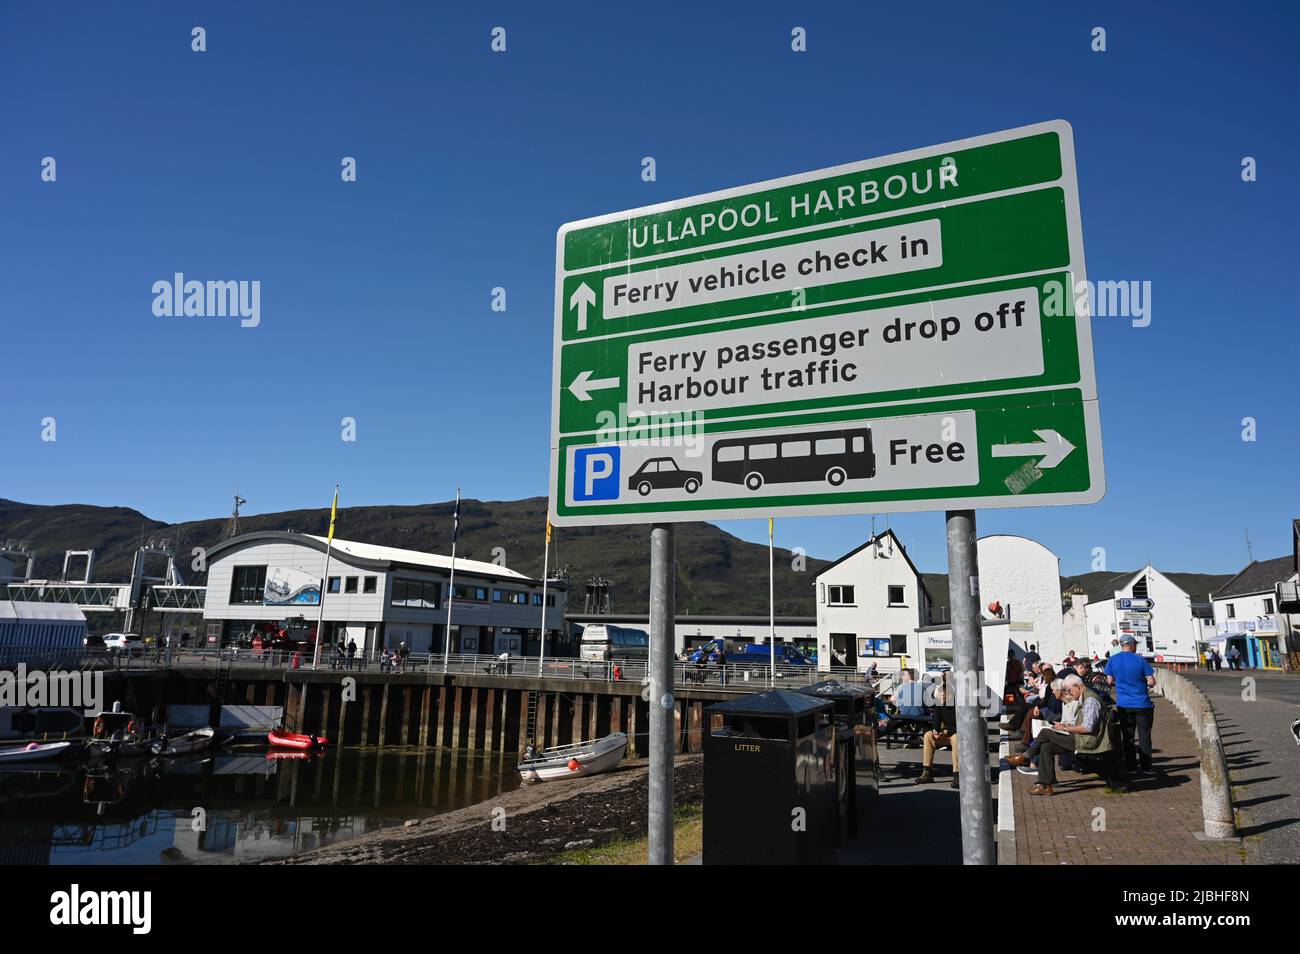 Sign for Ullapool harbour in Scotland, UK, showing arrows to ferry areas. People and ferry buildings in background. Blue sky, sunny day. Stock Photo